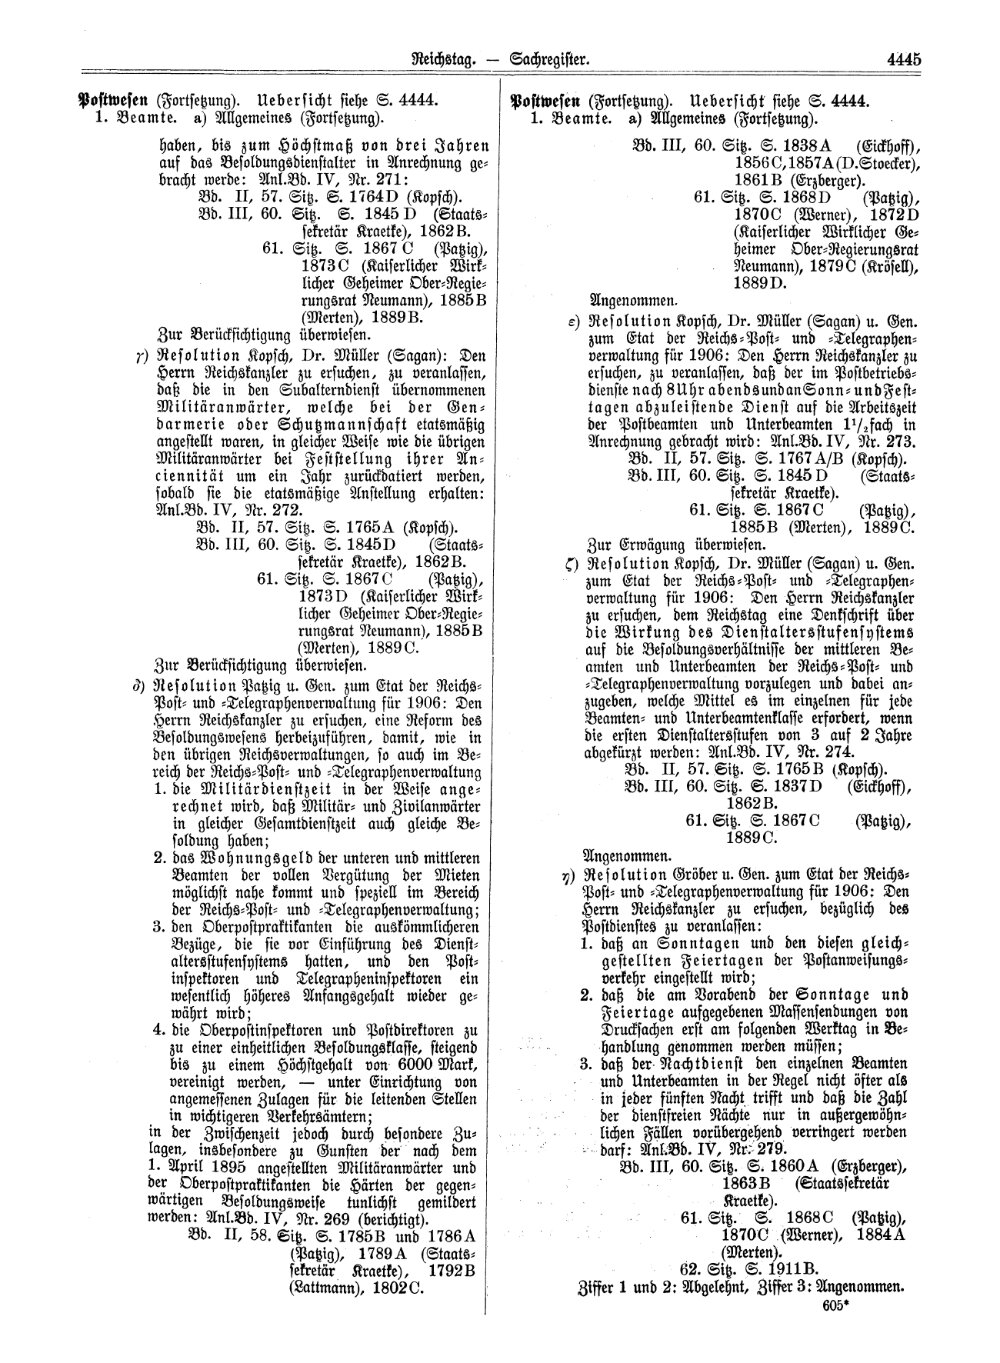 Scan of page 4445